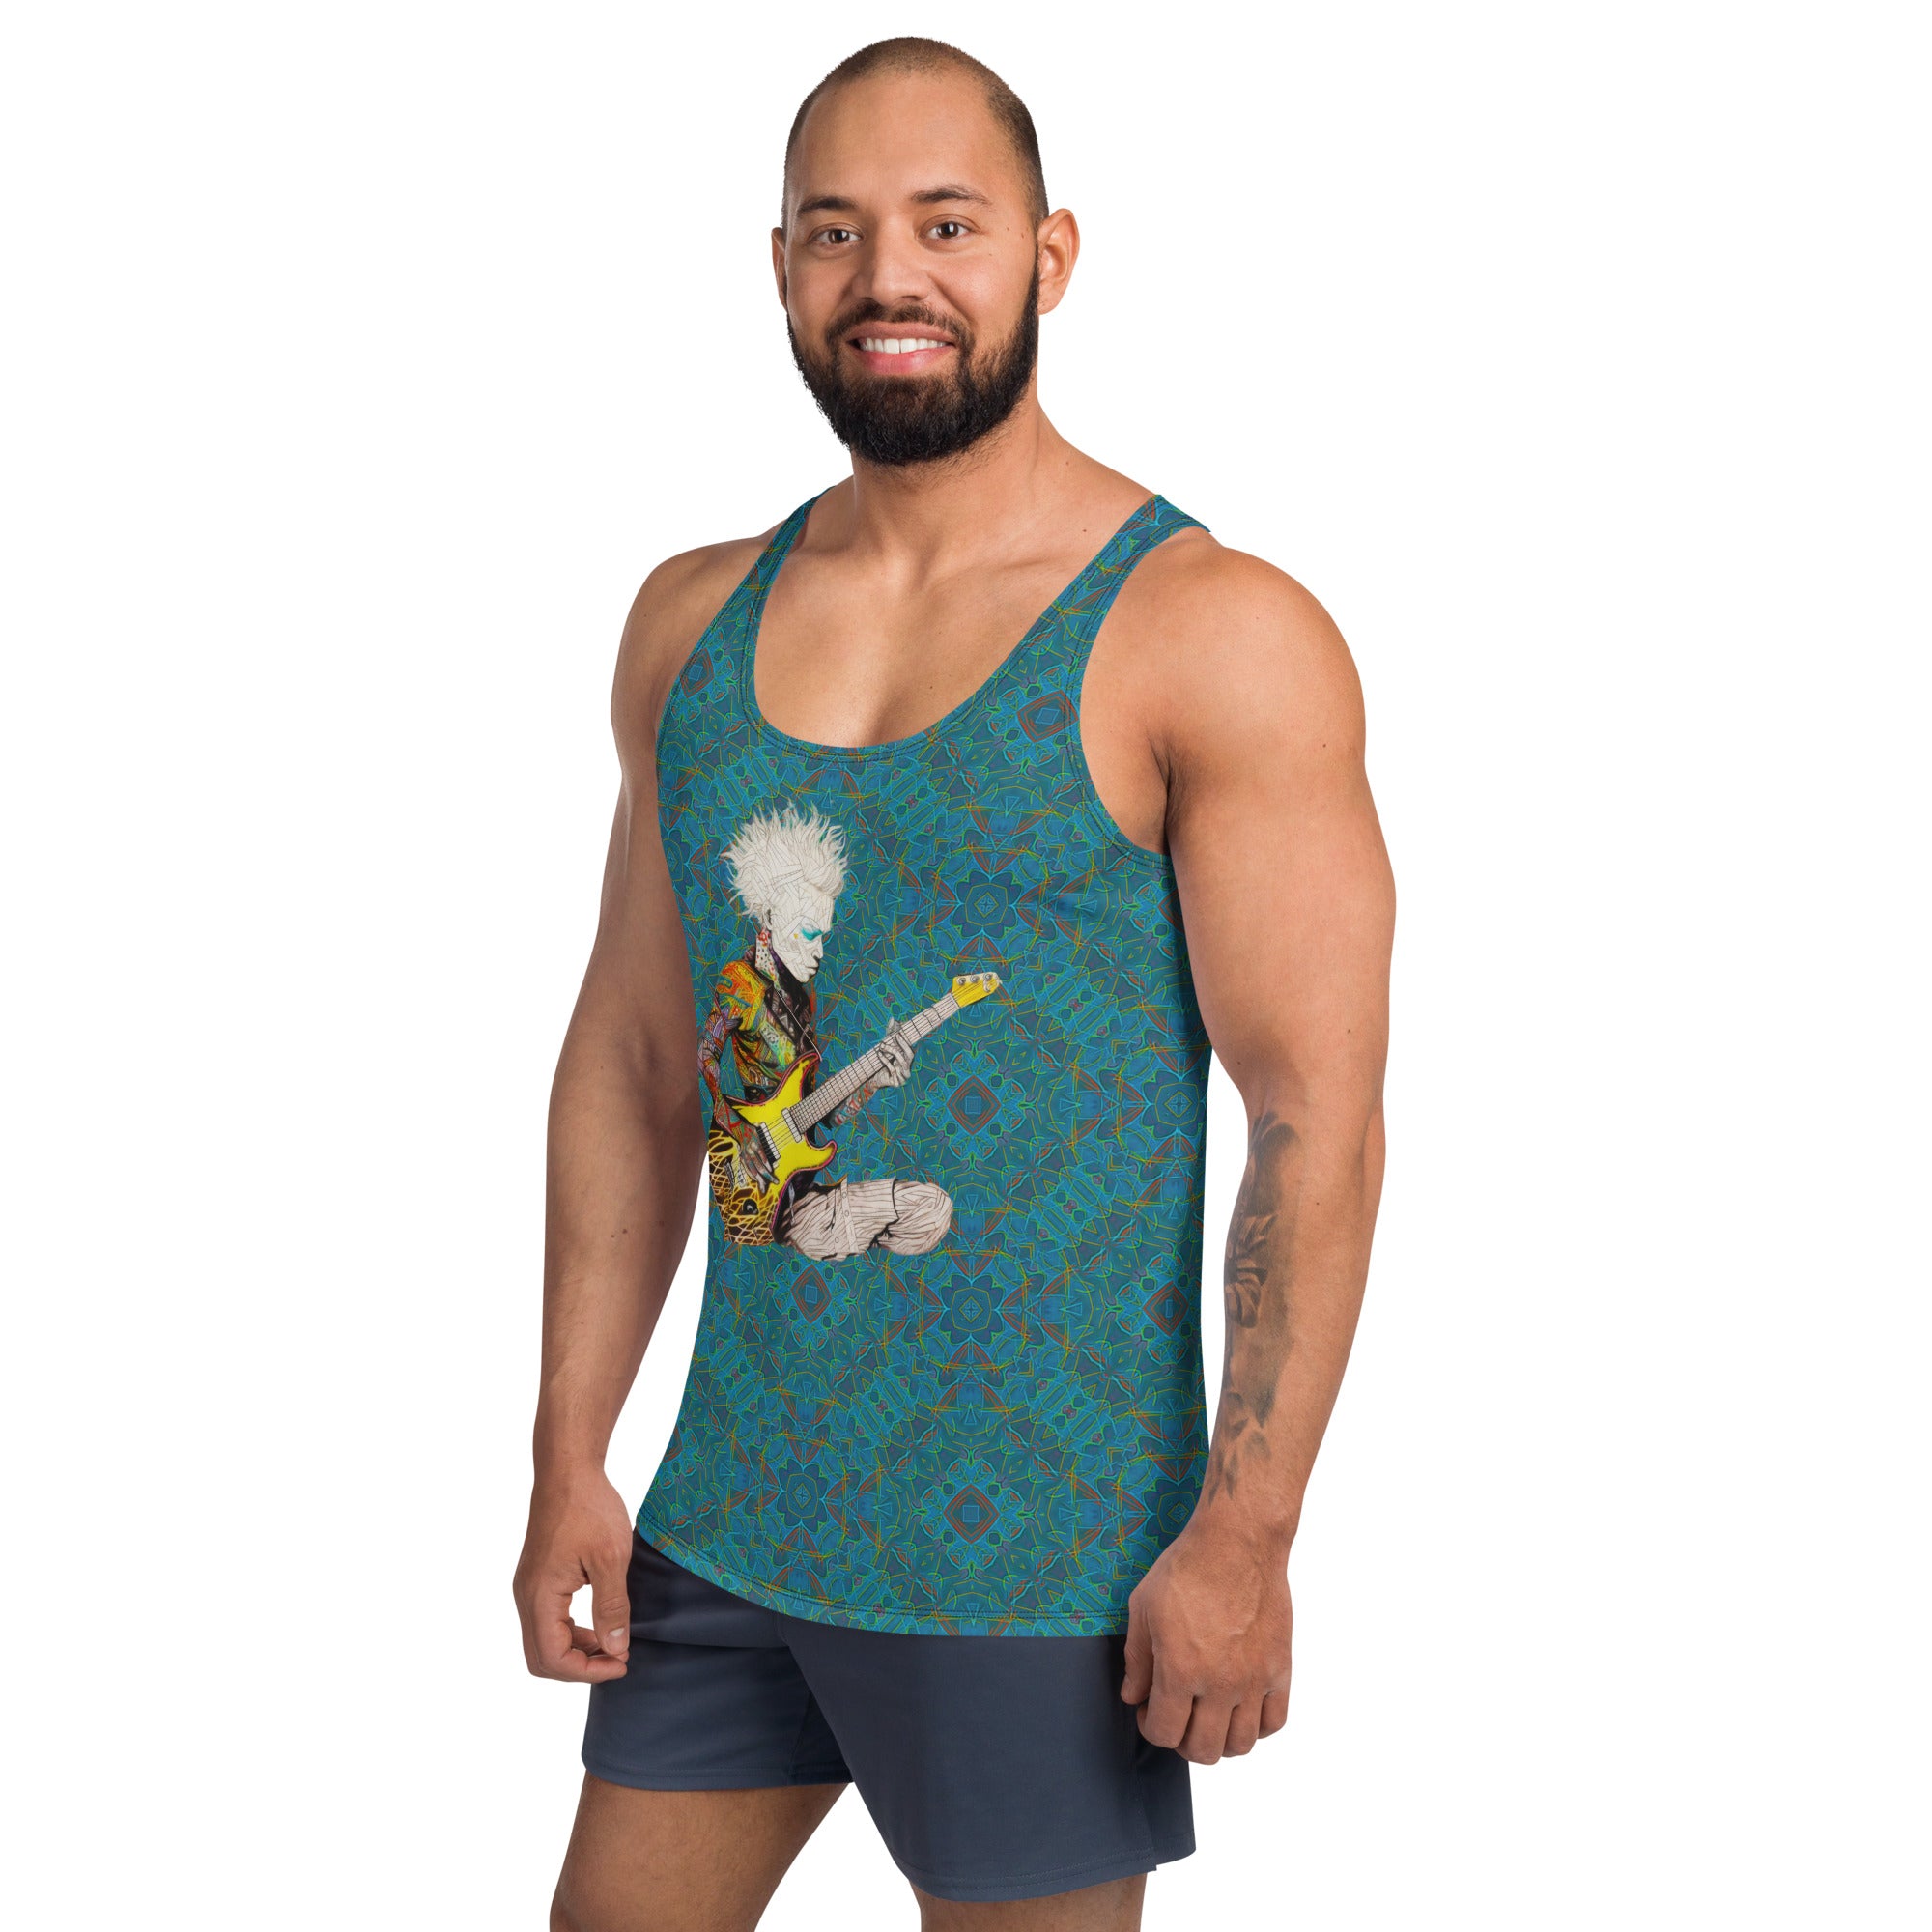 Stylish and comfortable men's tank top with unique comic design.